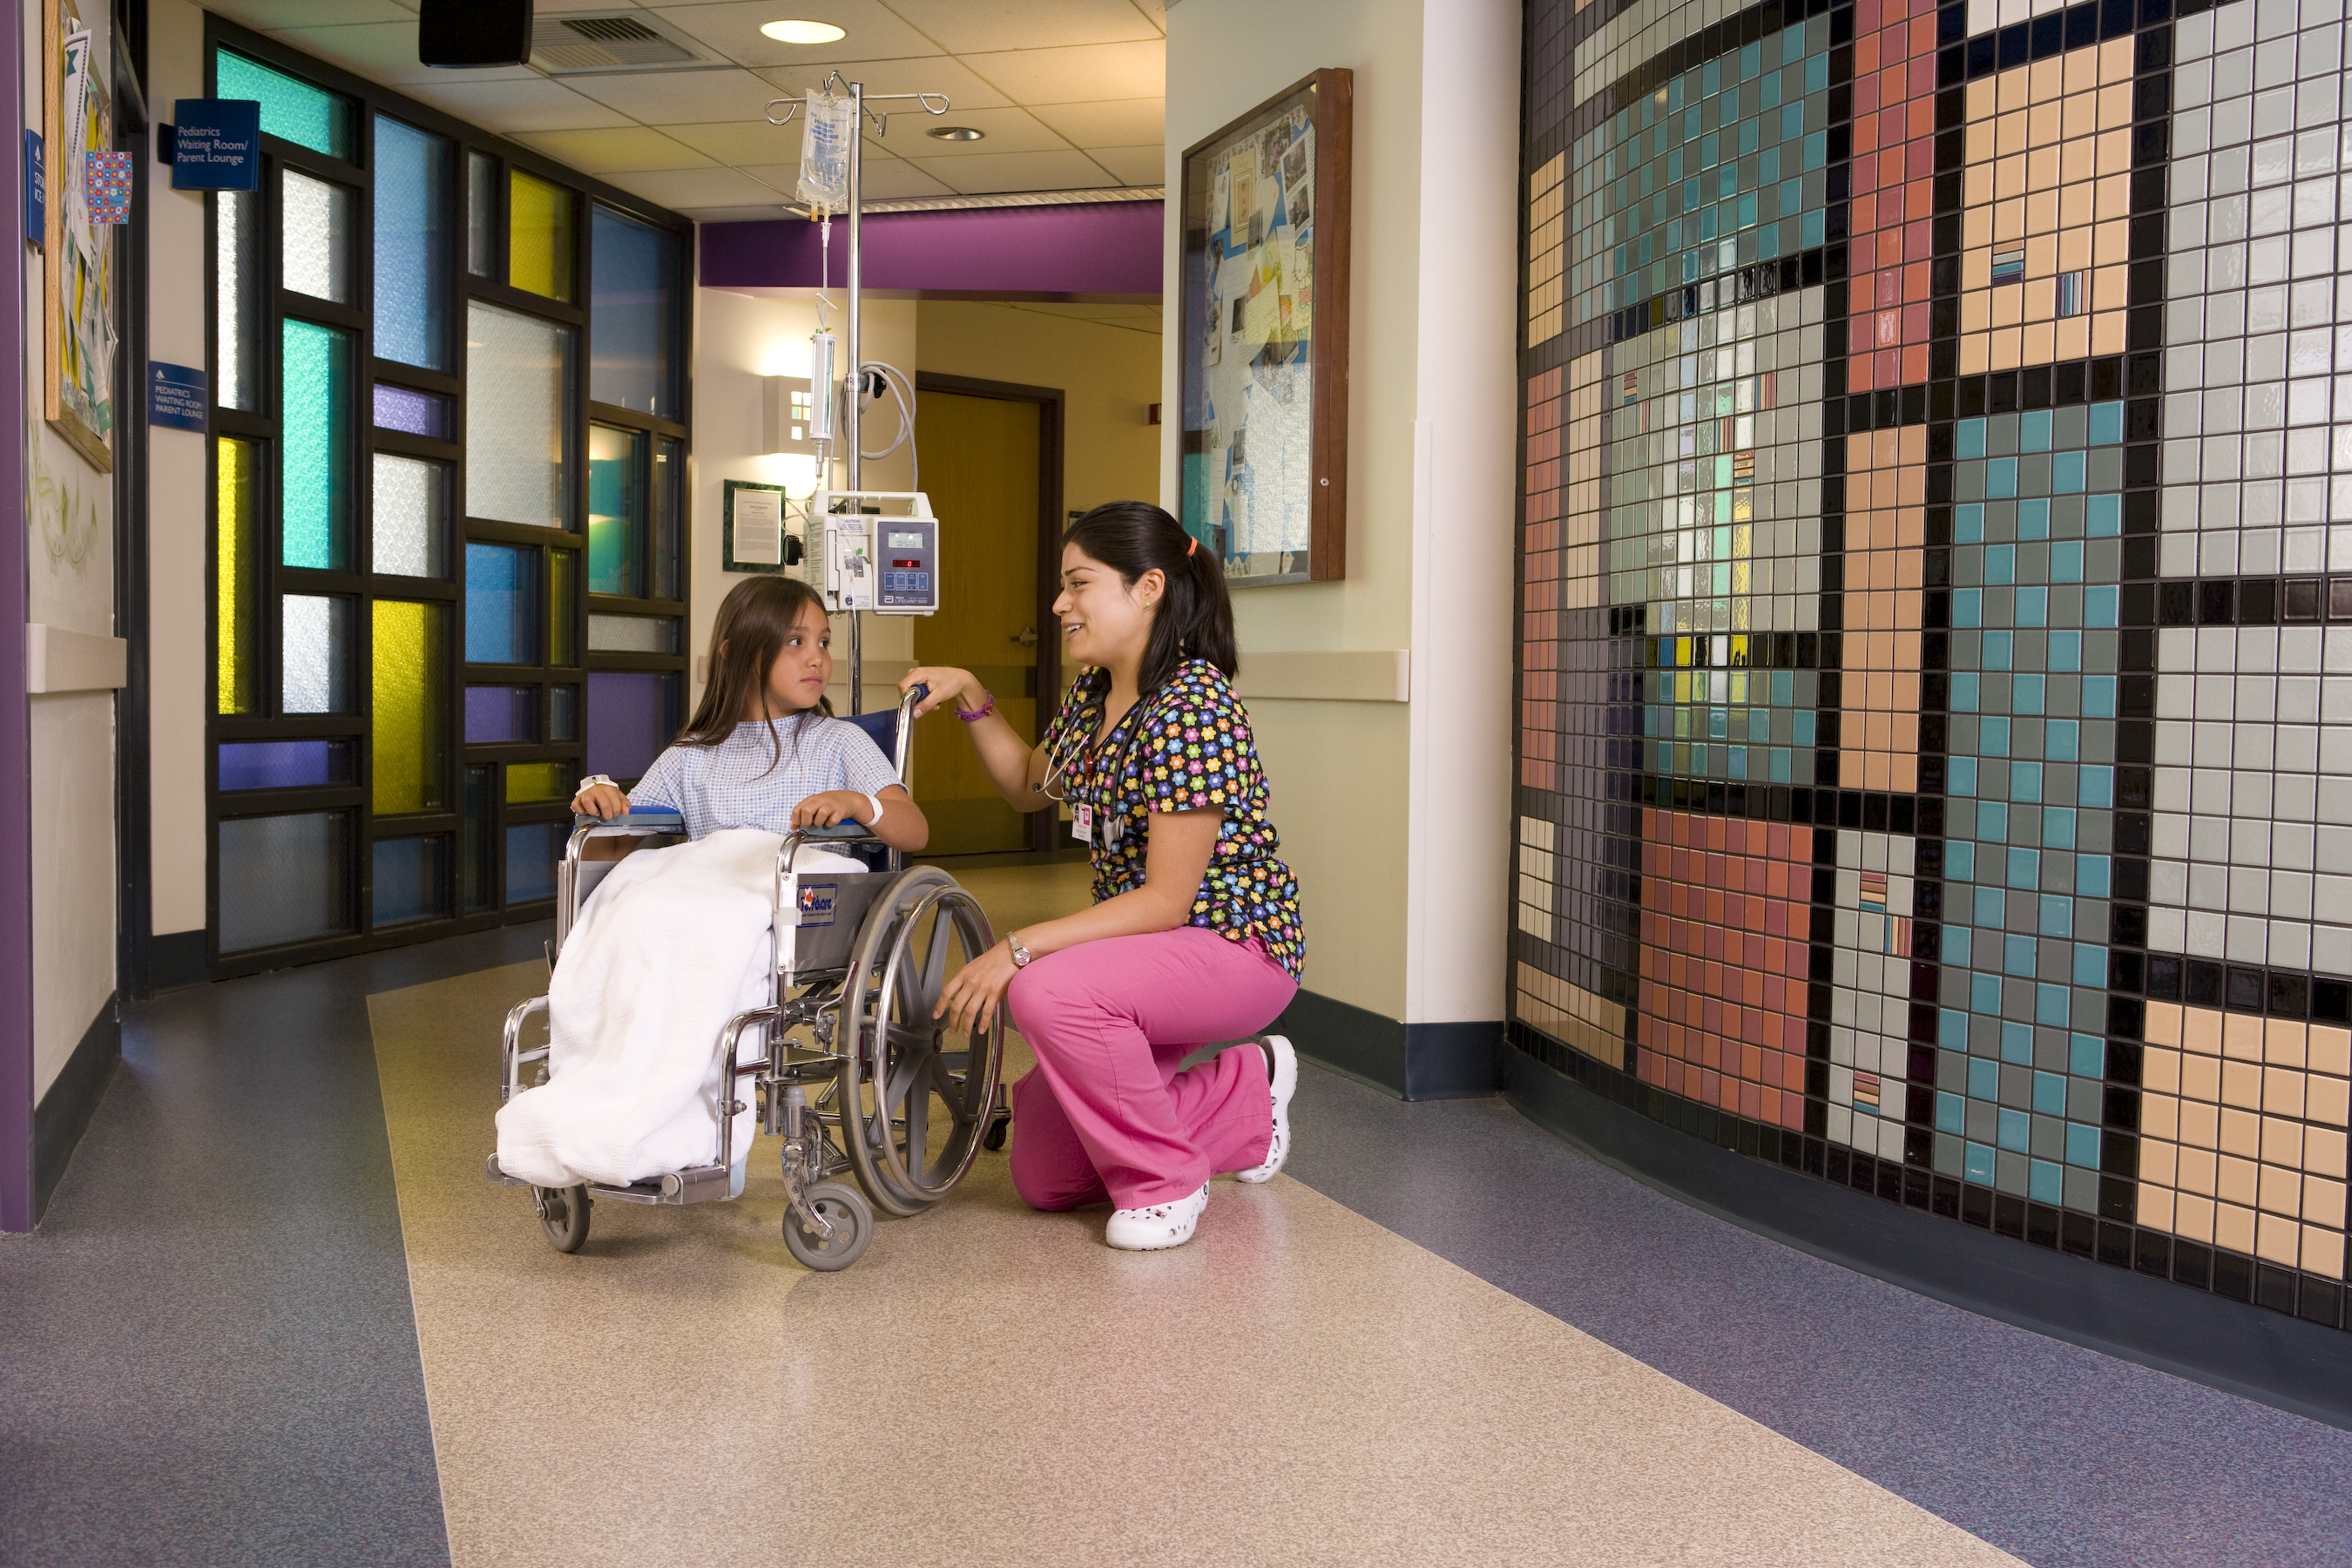 Young Girl in Wheelchair with Nurse Kneeling By Her